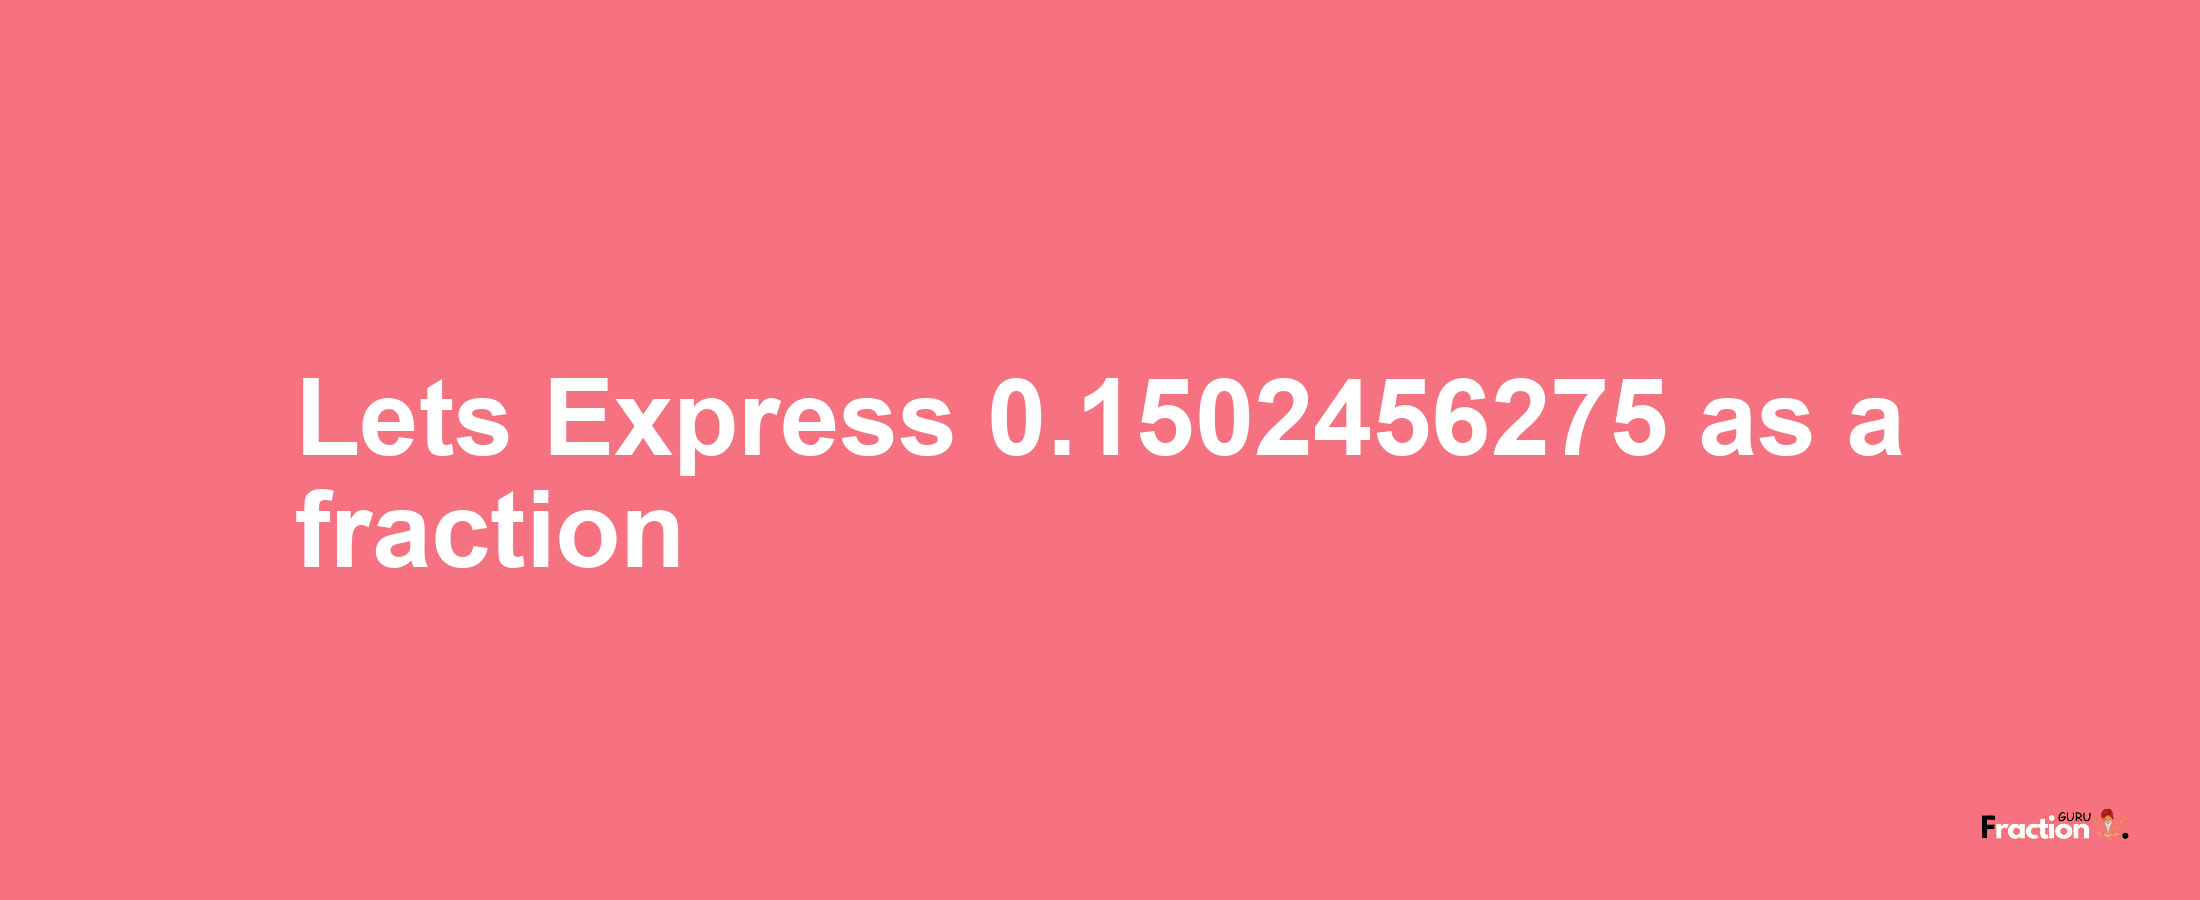 Lets Express 0.1502456275 as afraction